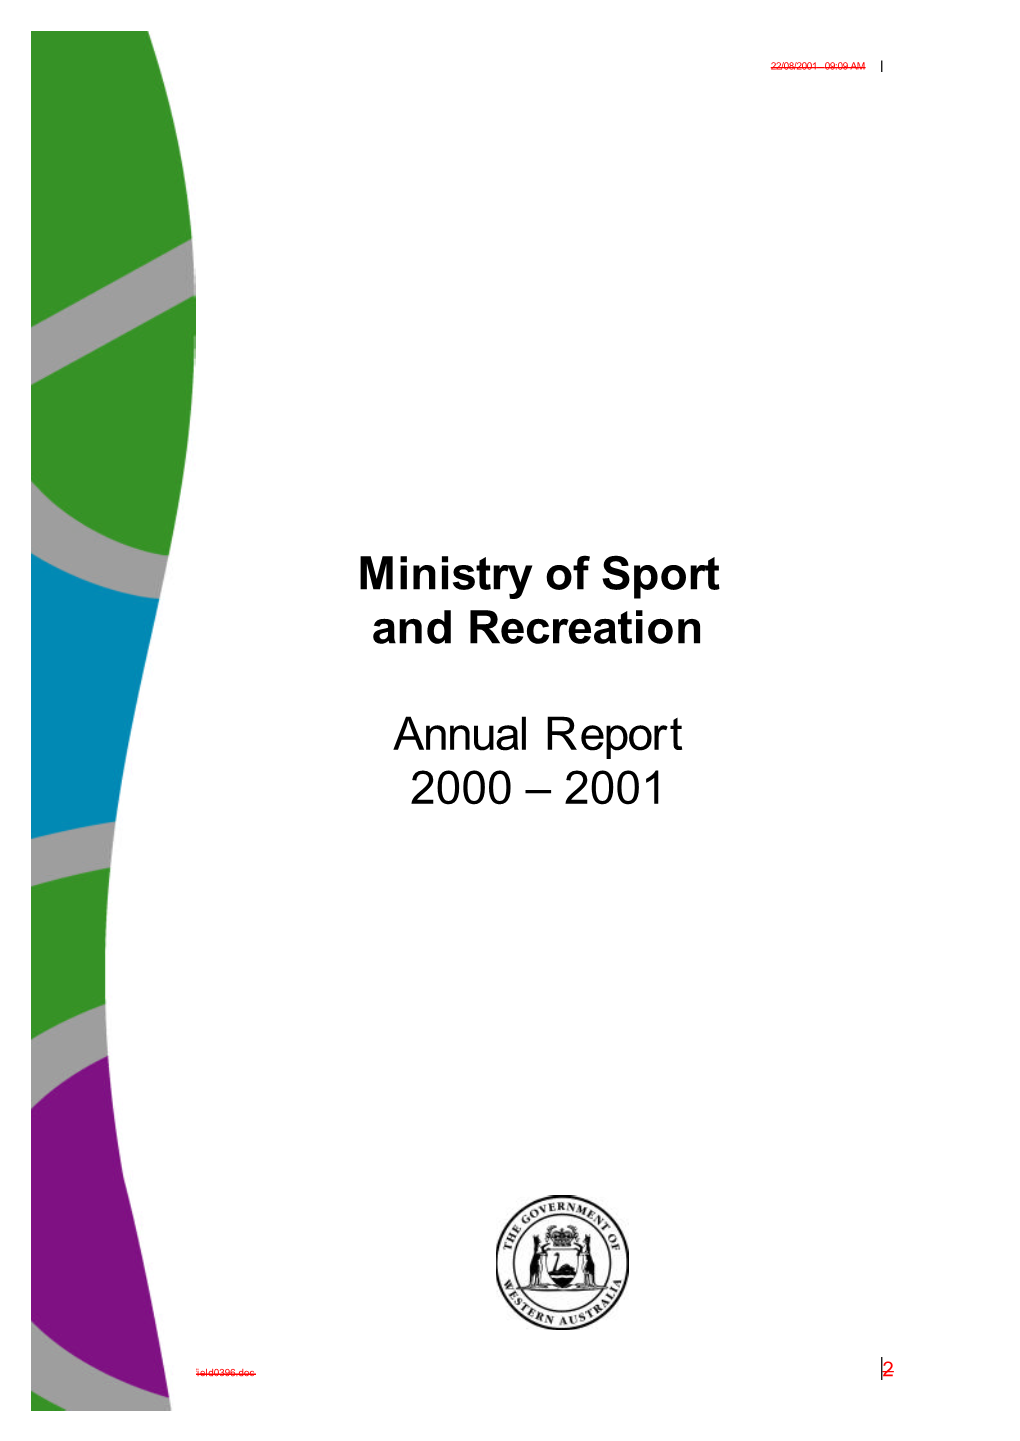 Ministry of Sport and Recreation Annual Report 2000 – 2001